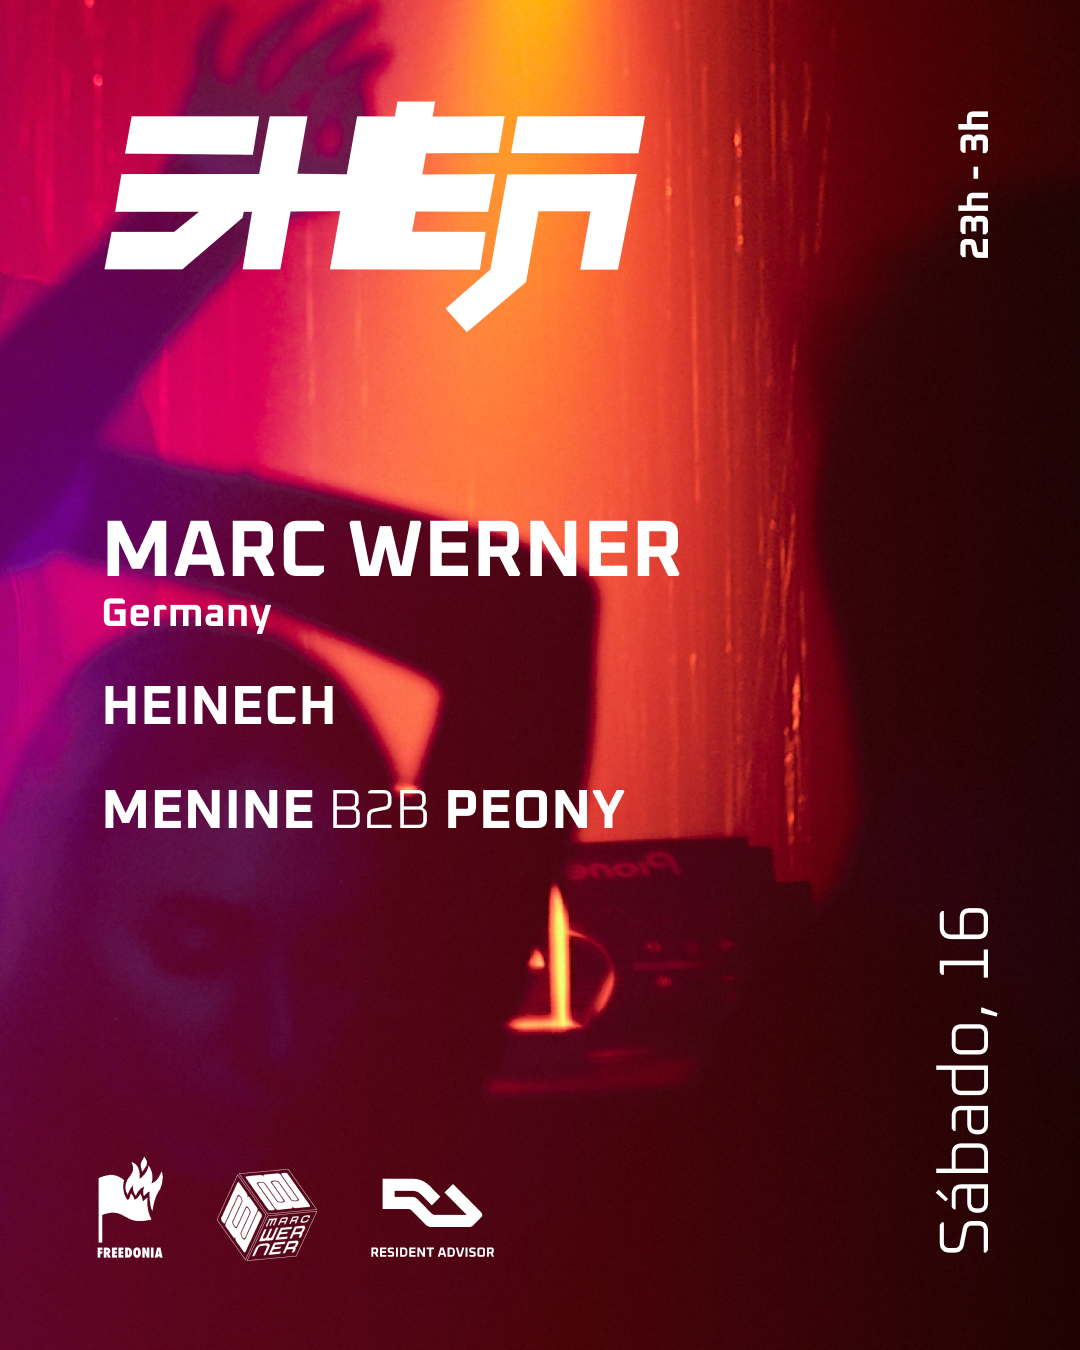 SHEA with MARC WERNER - フライヤー表